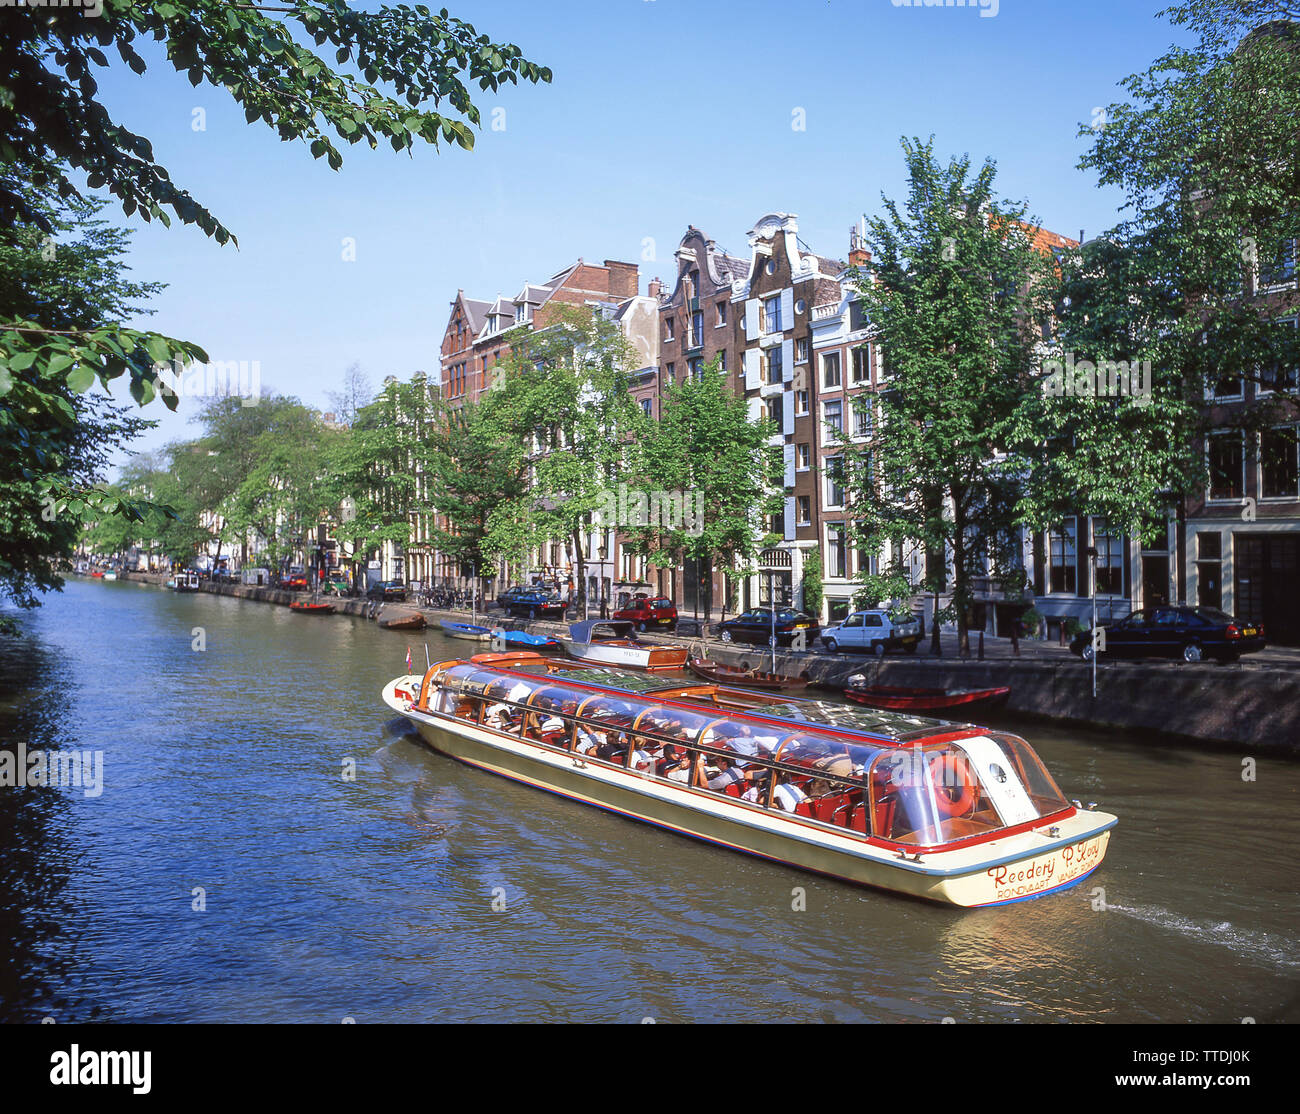 Canal excursion boat, Grachtengordel, Amsterdam, Noord-Holland, Kingdom of the Netherlands Stock Photo